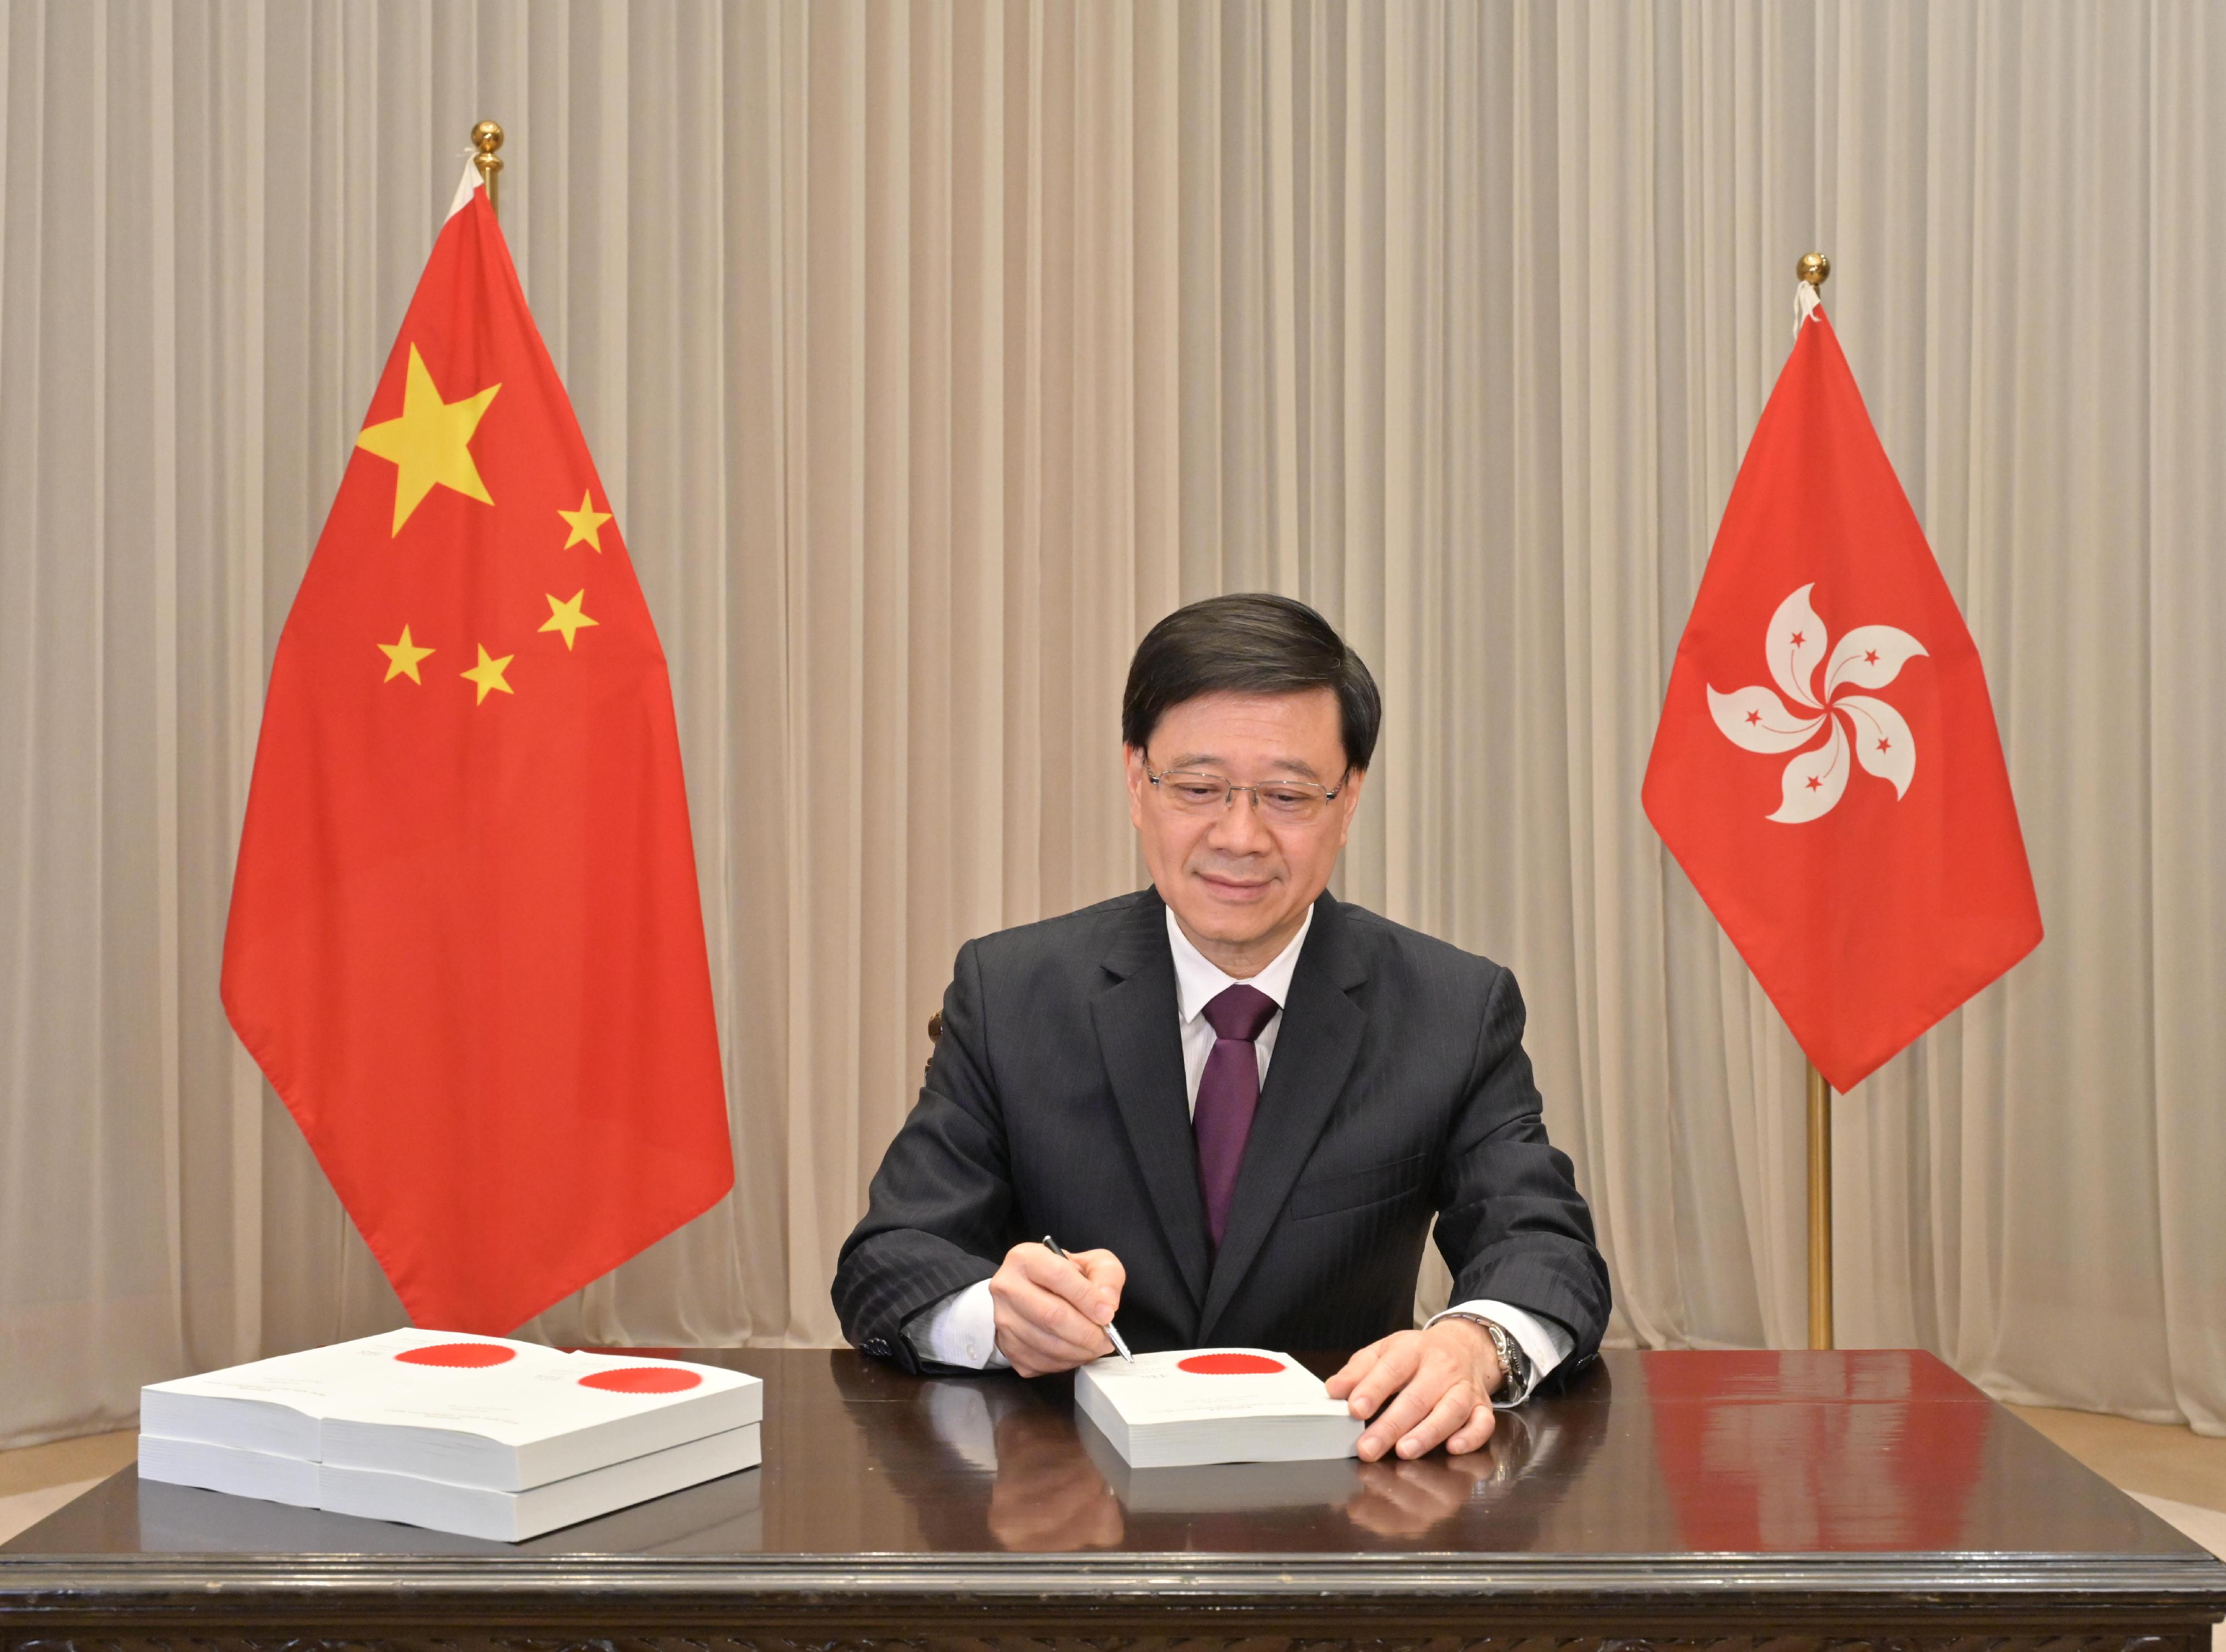 The Chief Executive, Mr John Lee, today (March 22) signed, in accordance with Article 48(3) of the Basic Law, the Safeguarding National Security Ordinance passed by the Legislative Council. The Ordinance will take effect upon gazettal tomorrow (March 23).